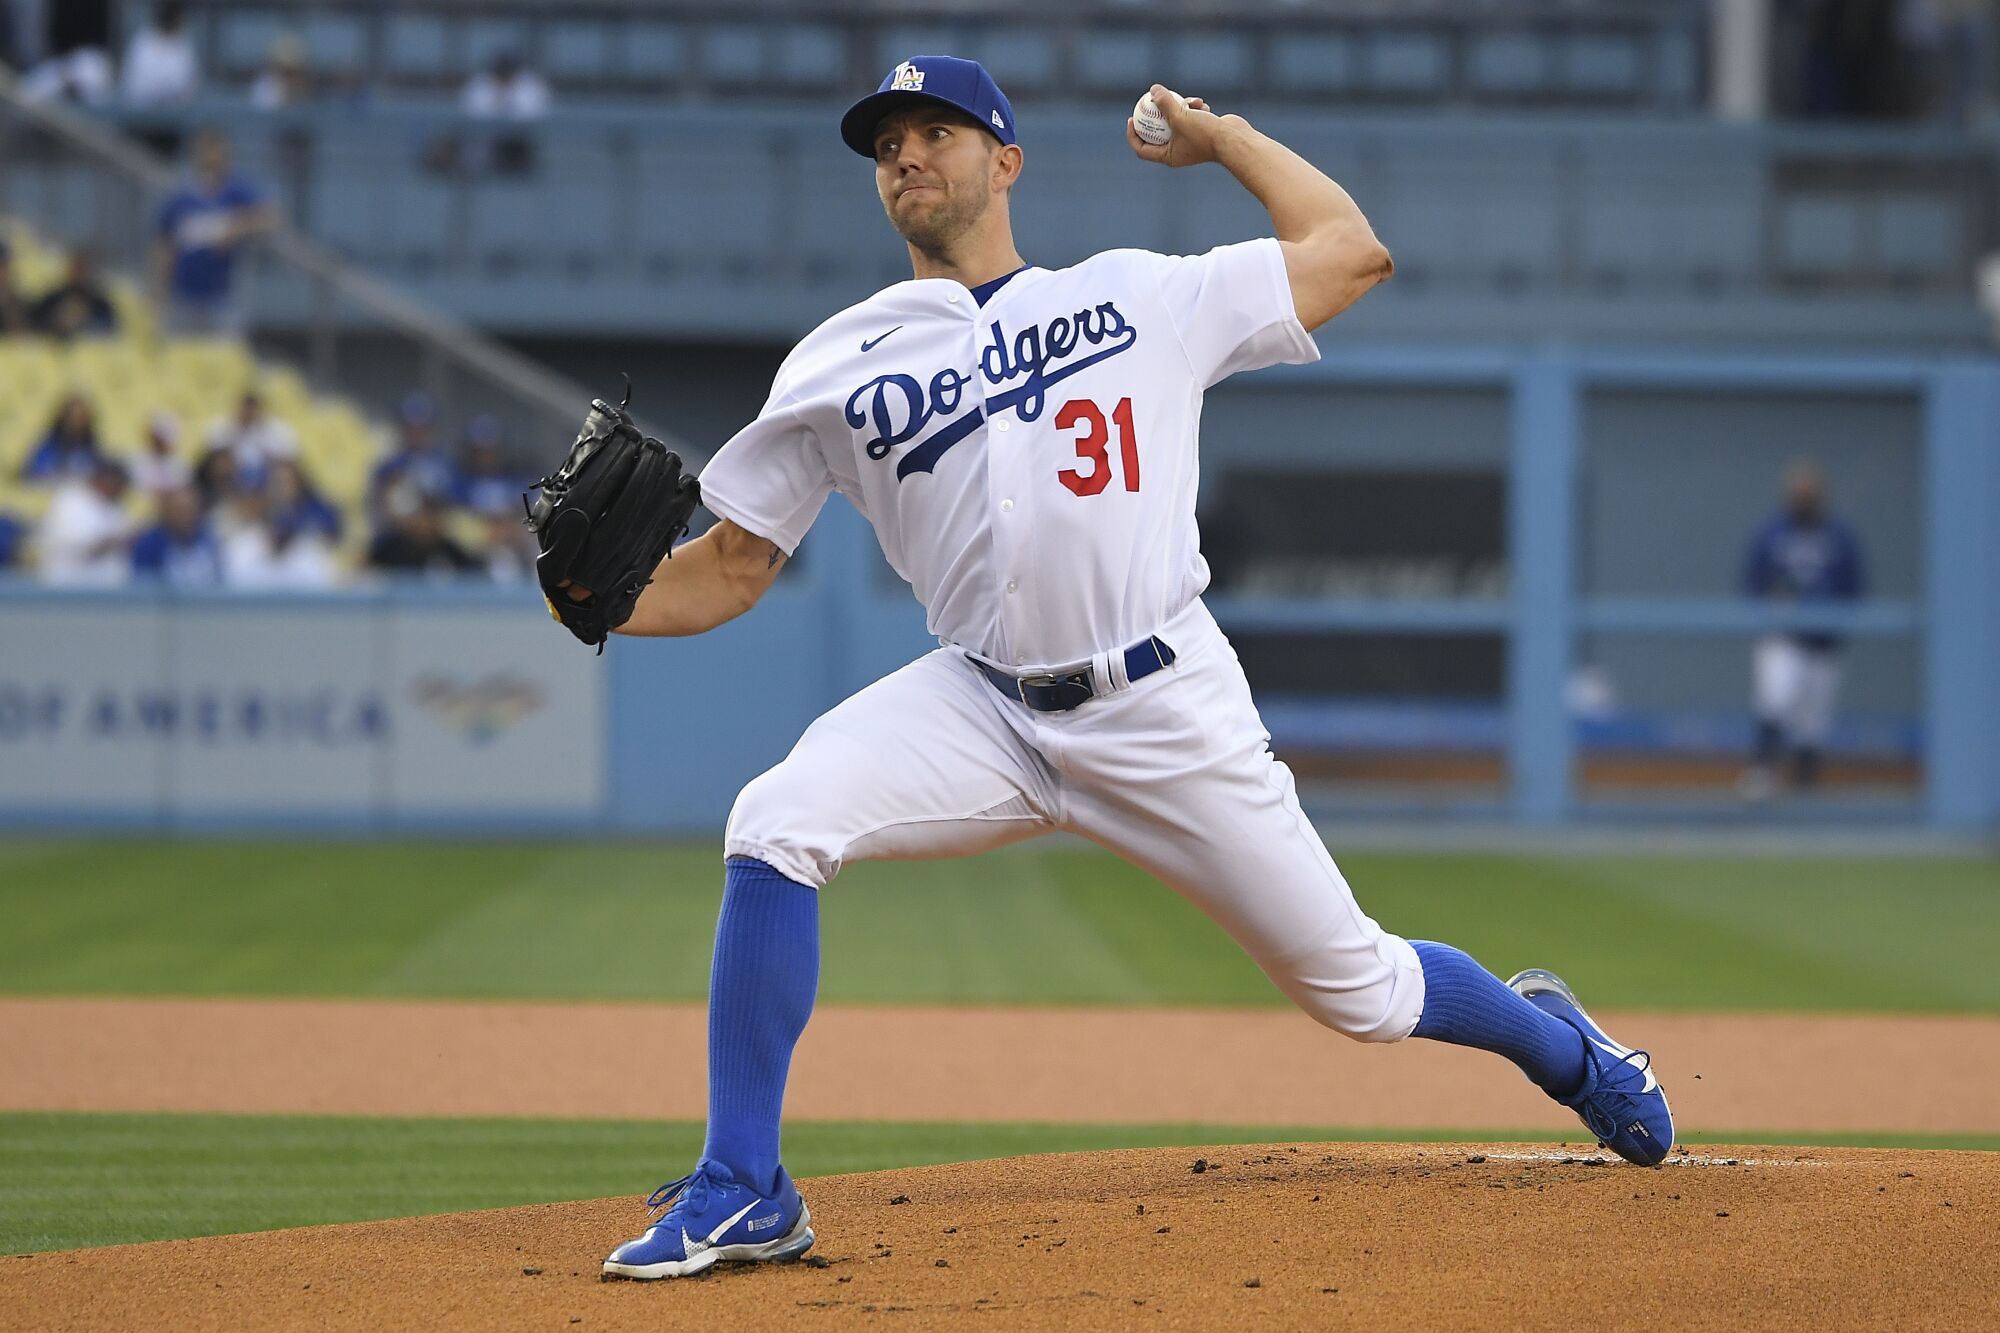 Tyler Anderson pitched six scoreless innings Friday in the Dodgers' 6-1 win.